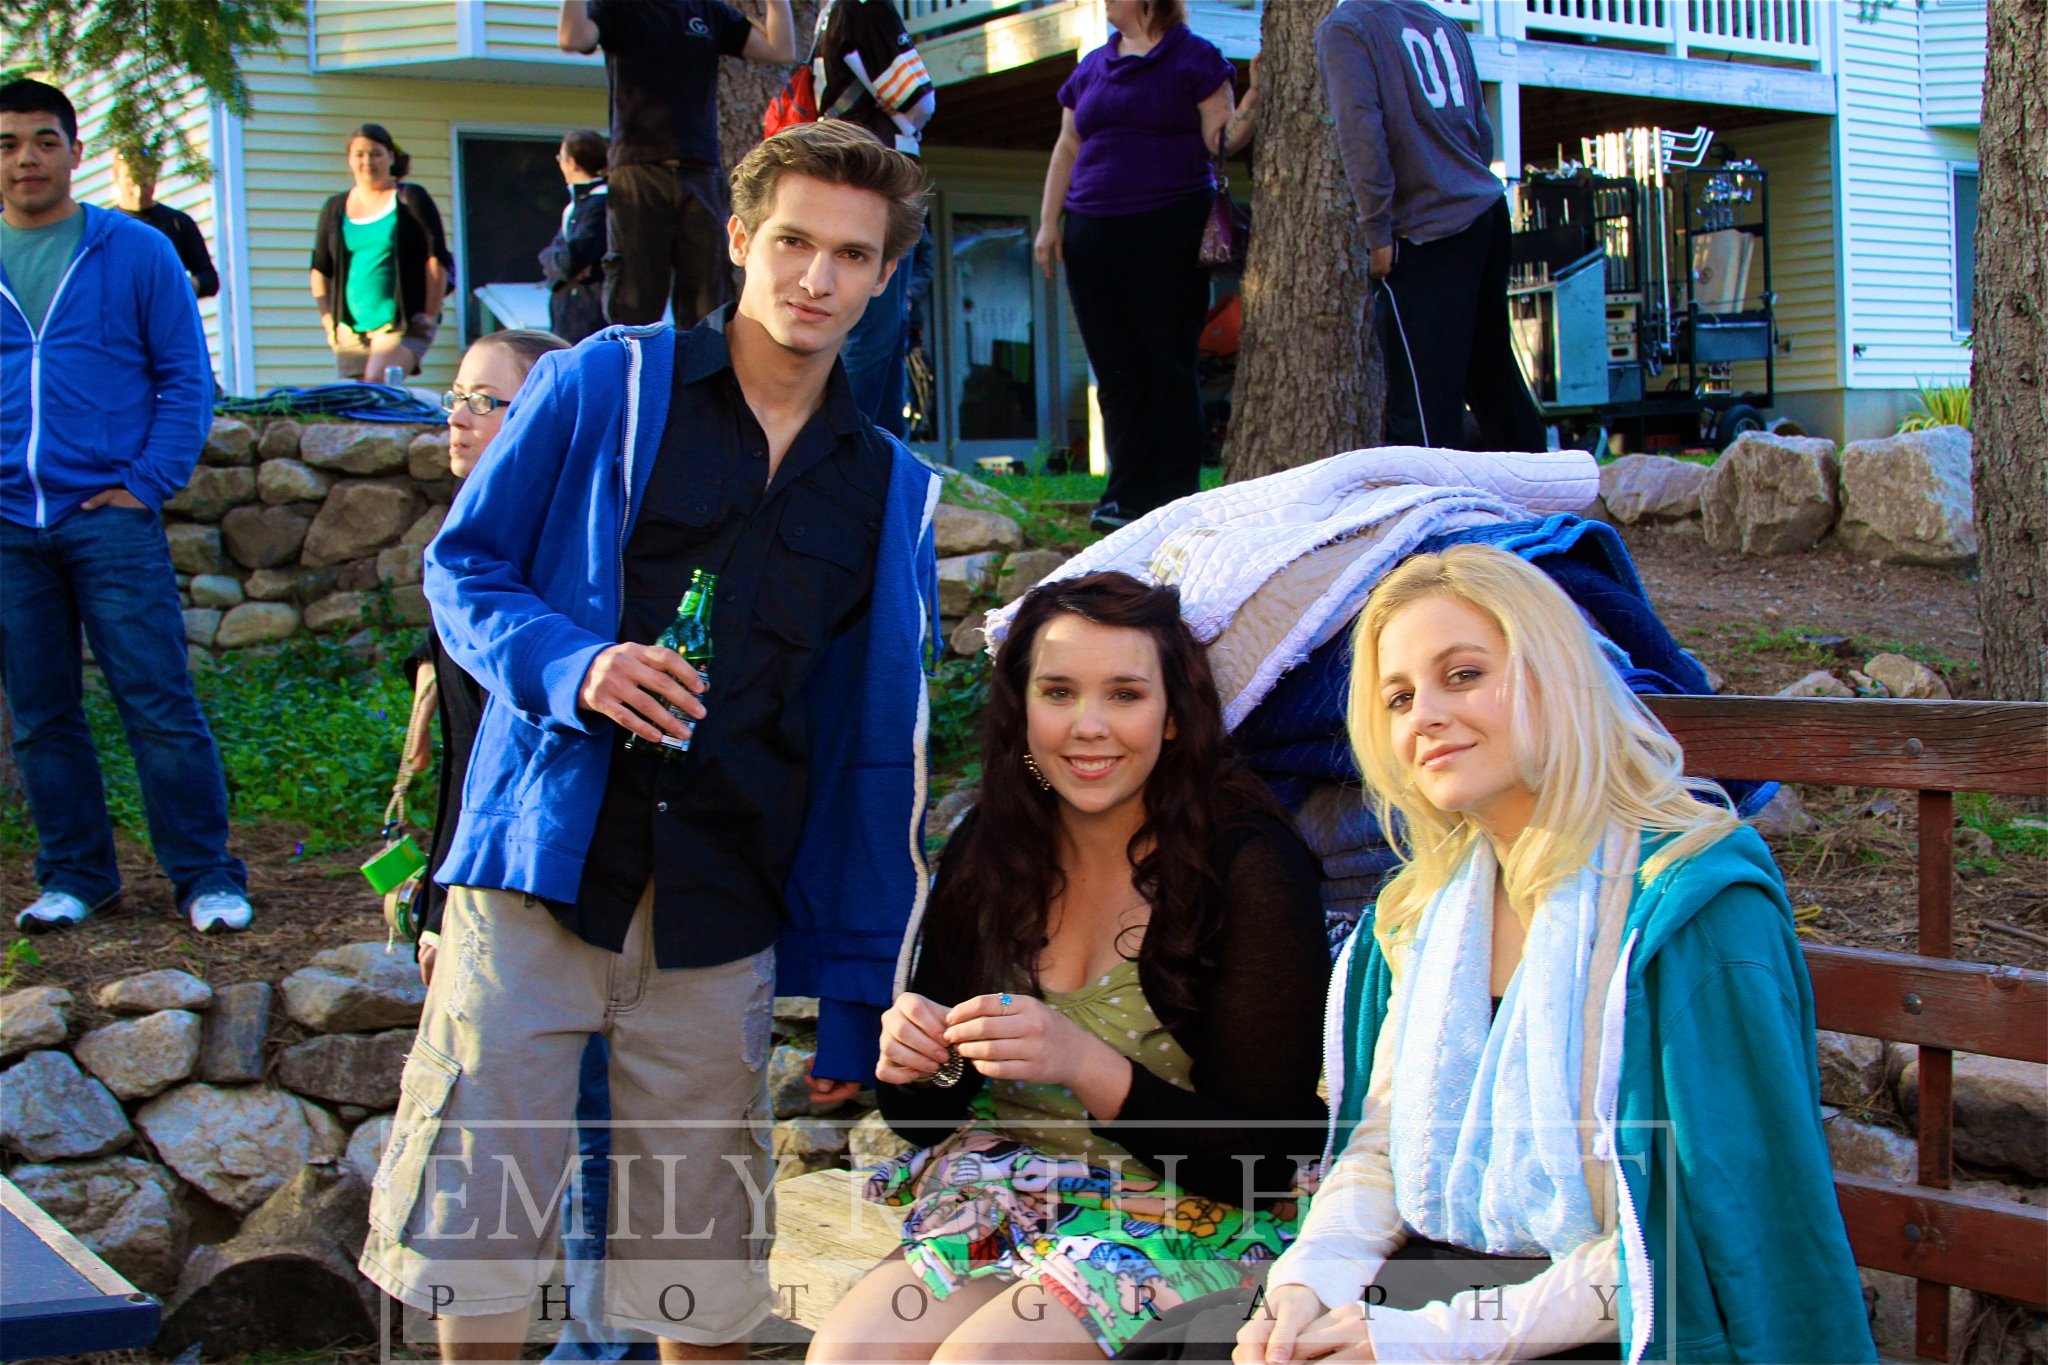 Amy Lia on set with co-stars, Hunter Gomez and Emily Arnold.